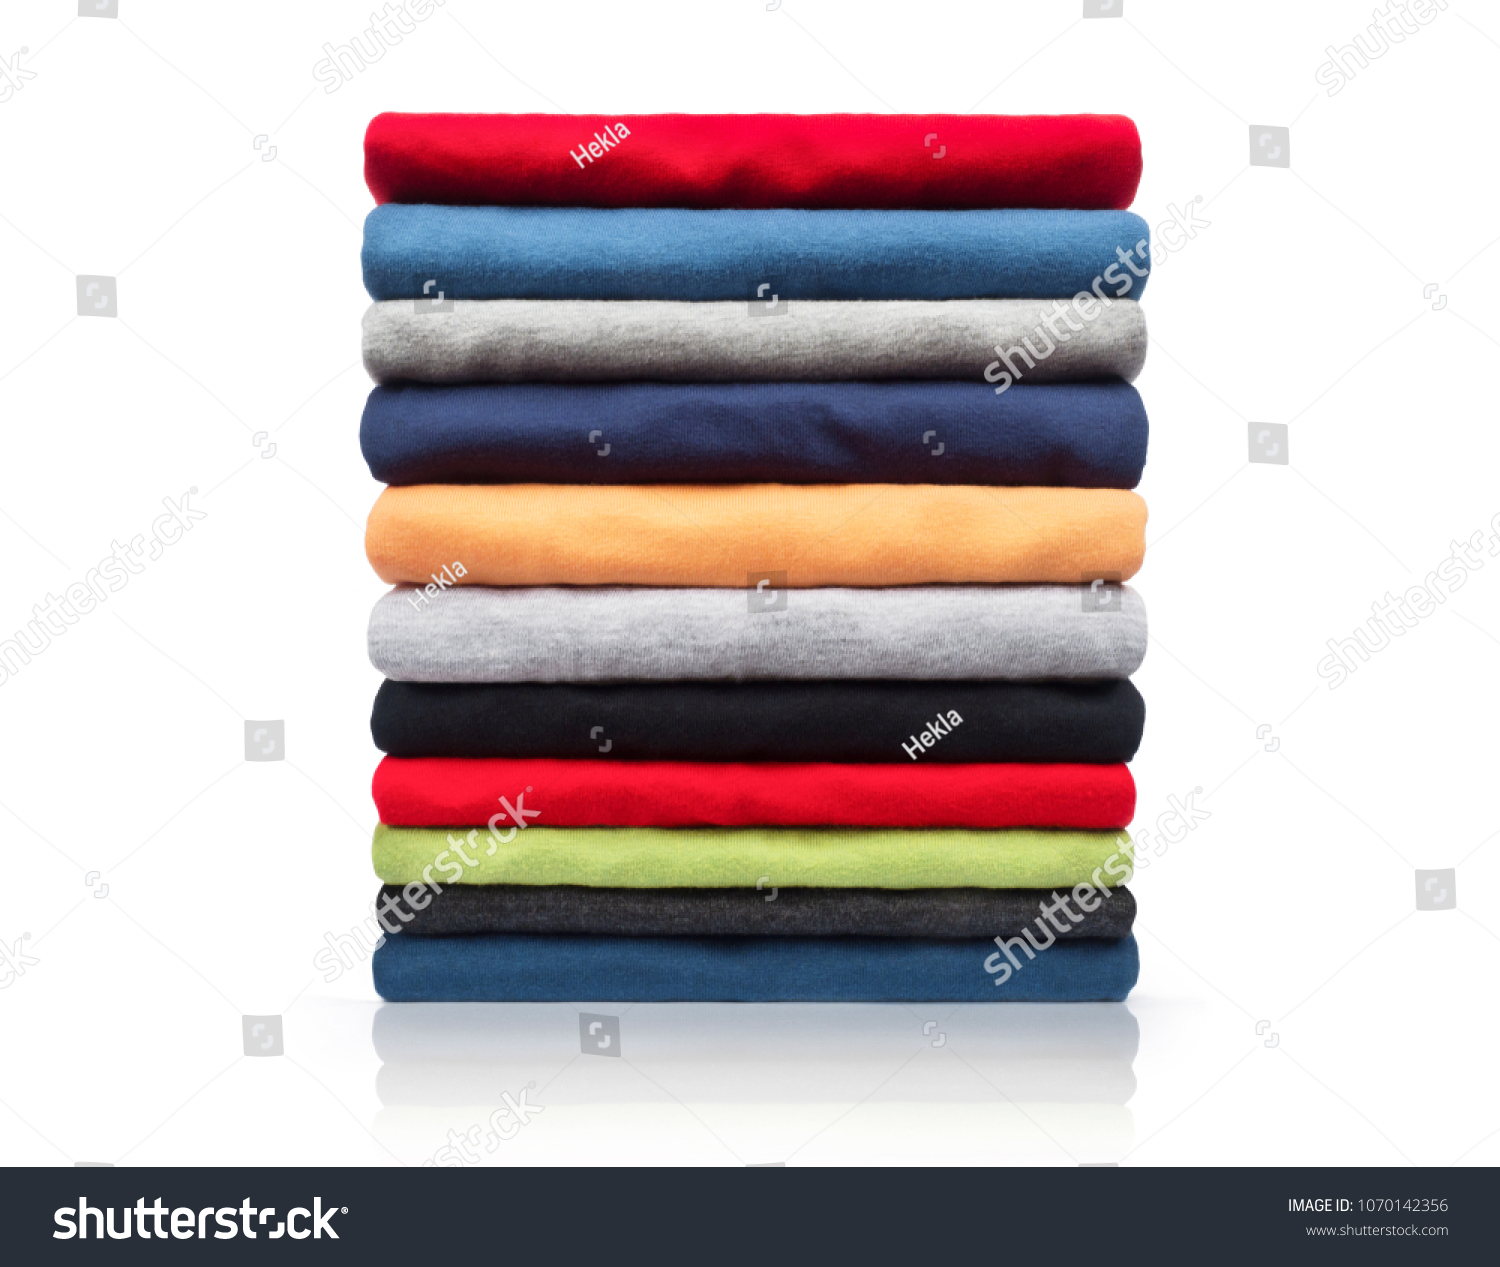 55,031 Folded pile of clothes Images, Stock Photos & Vectors | Shutterstock